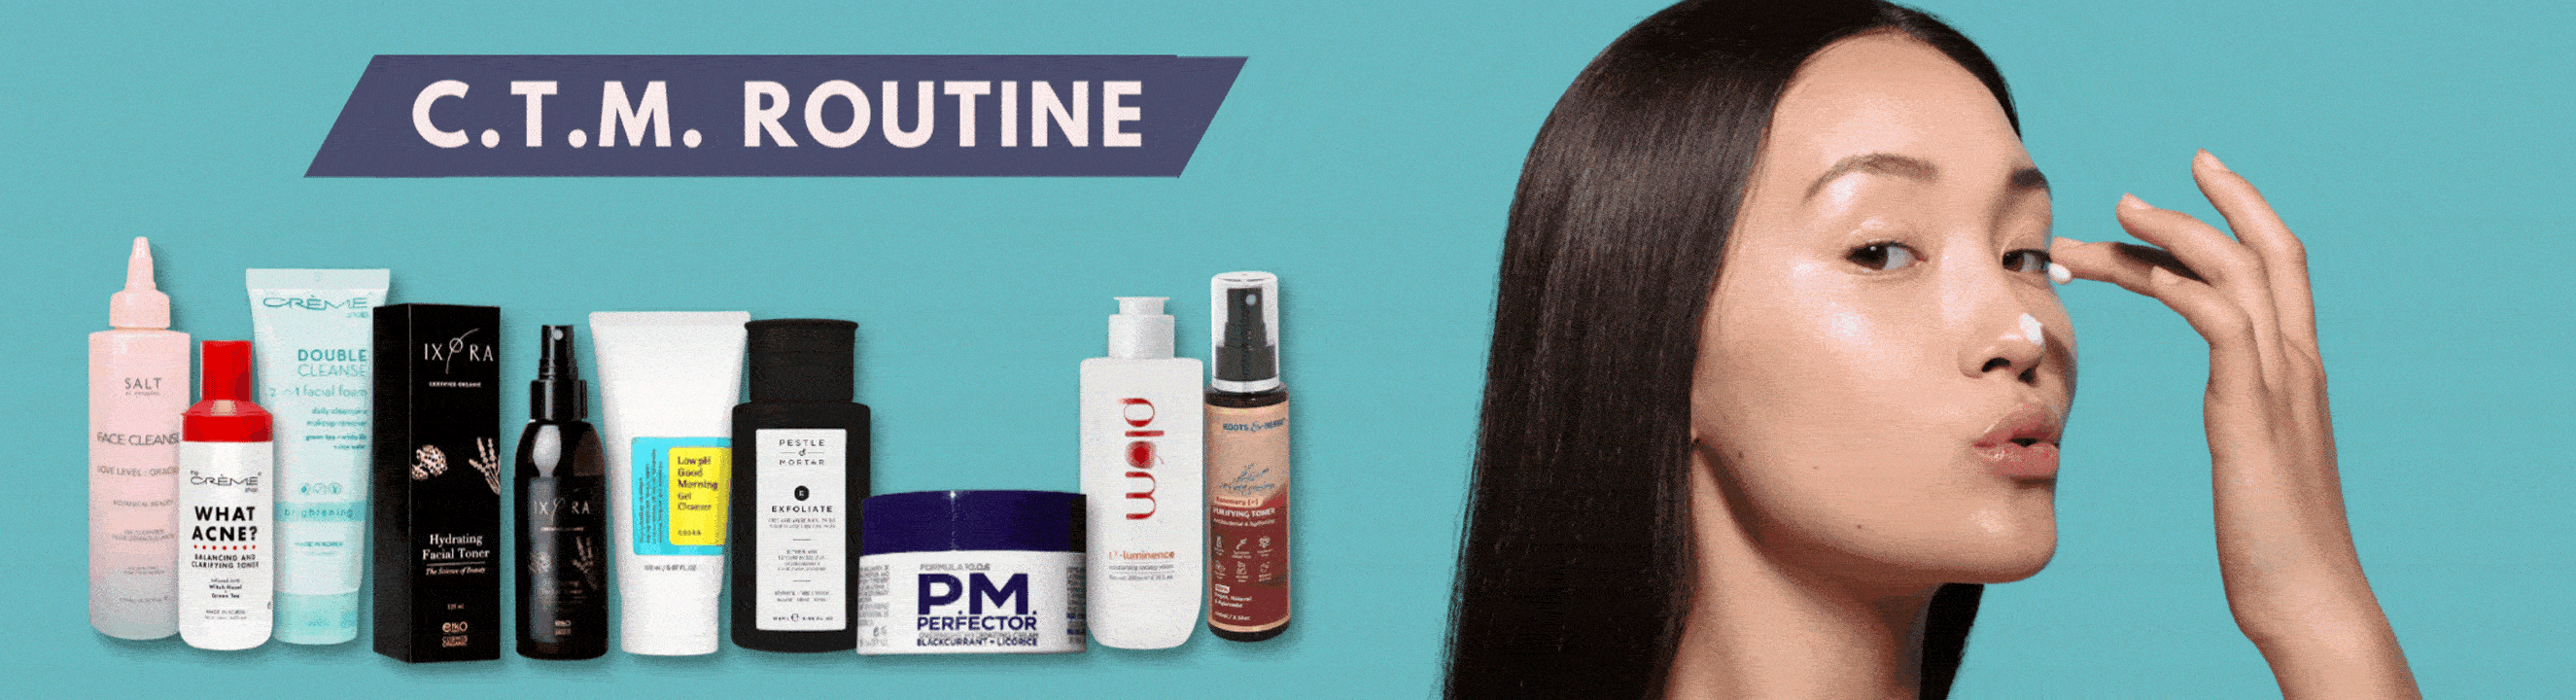 ctm-routine-collection